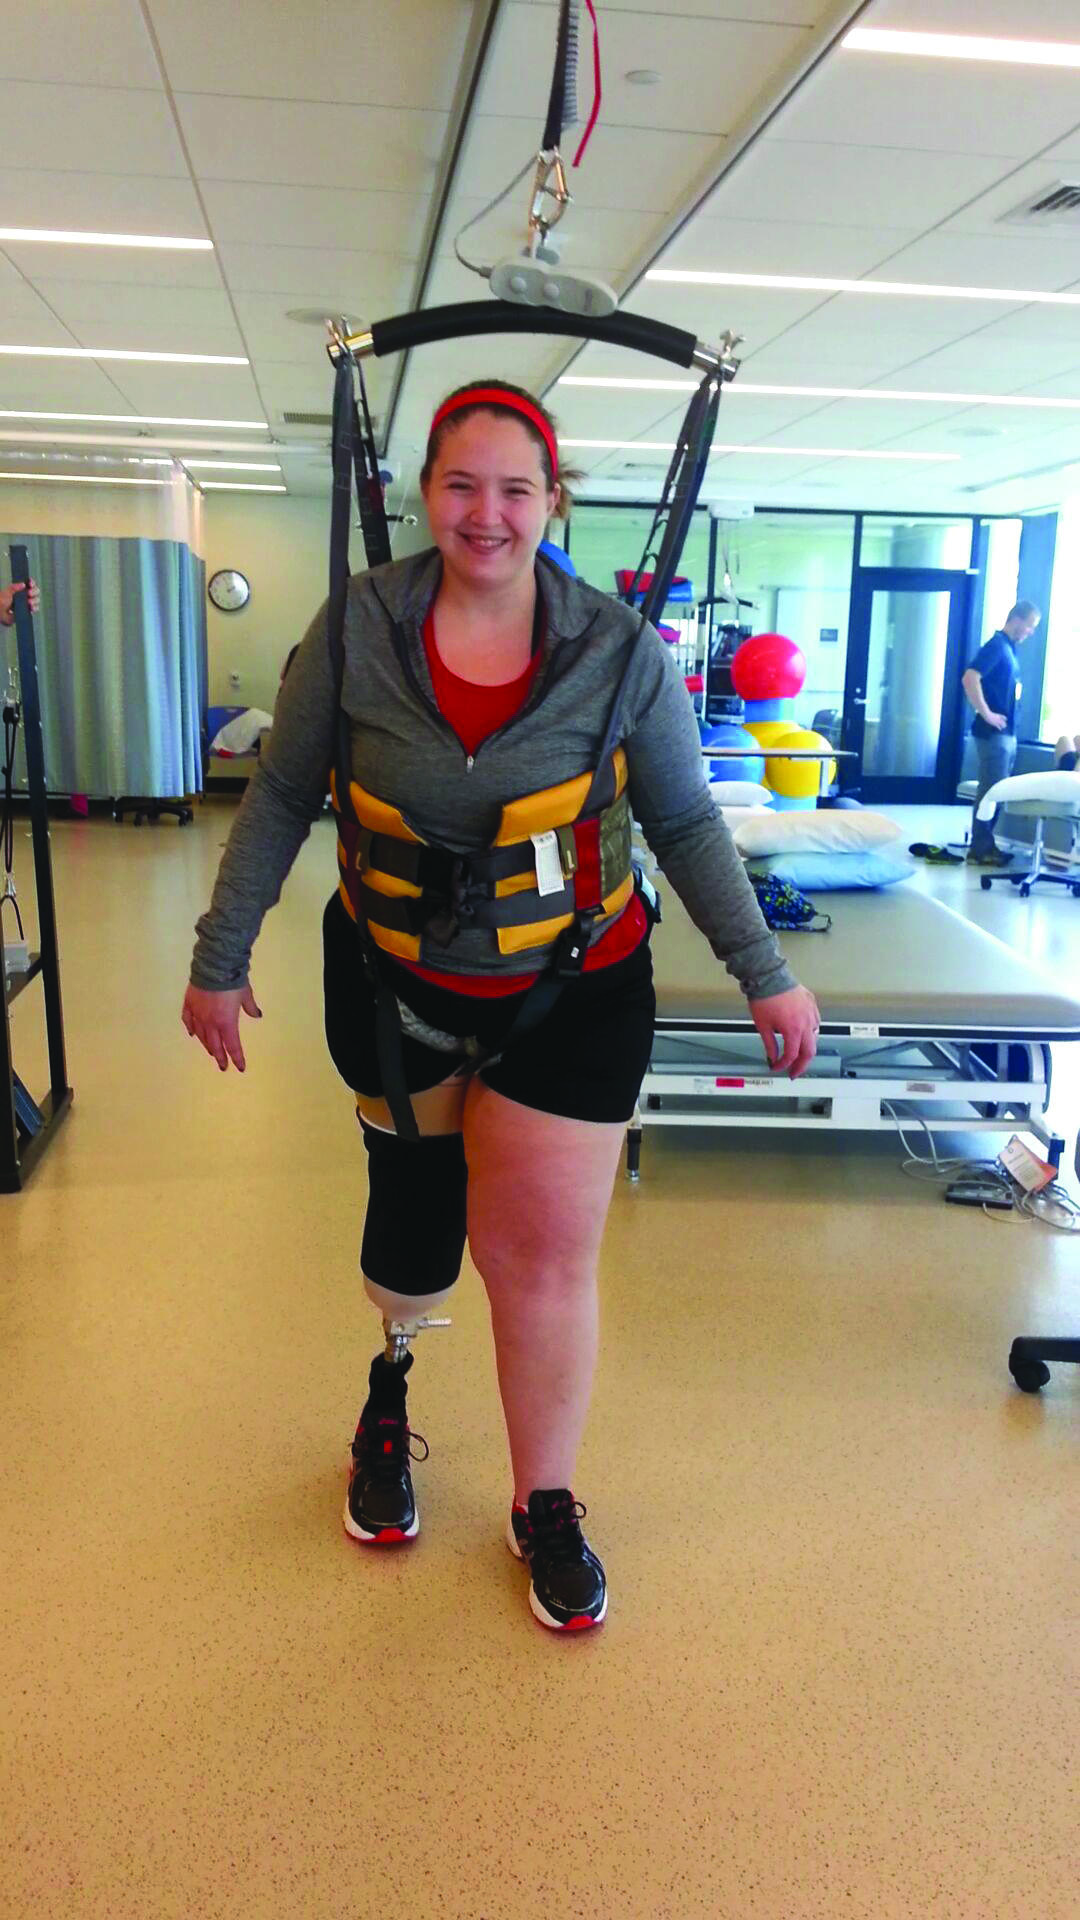 After amputating, DeChellis’ main goal was to regain strength and learn how to walk with a prosthetic.